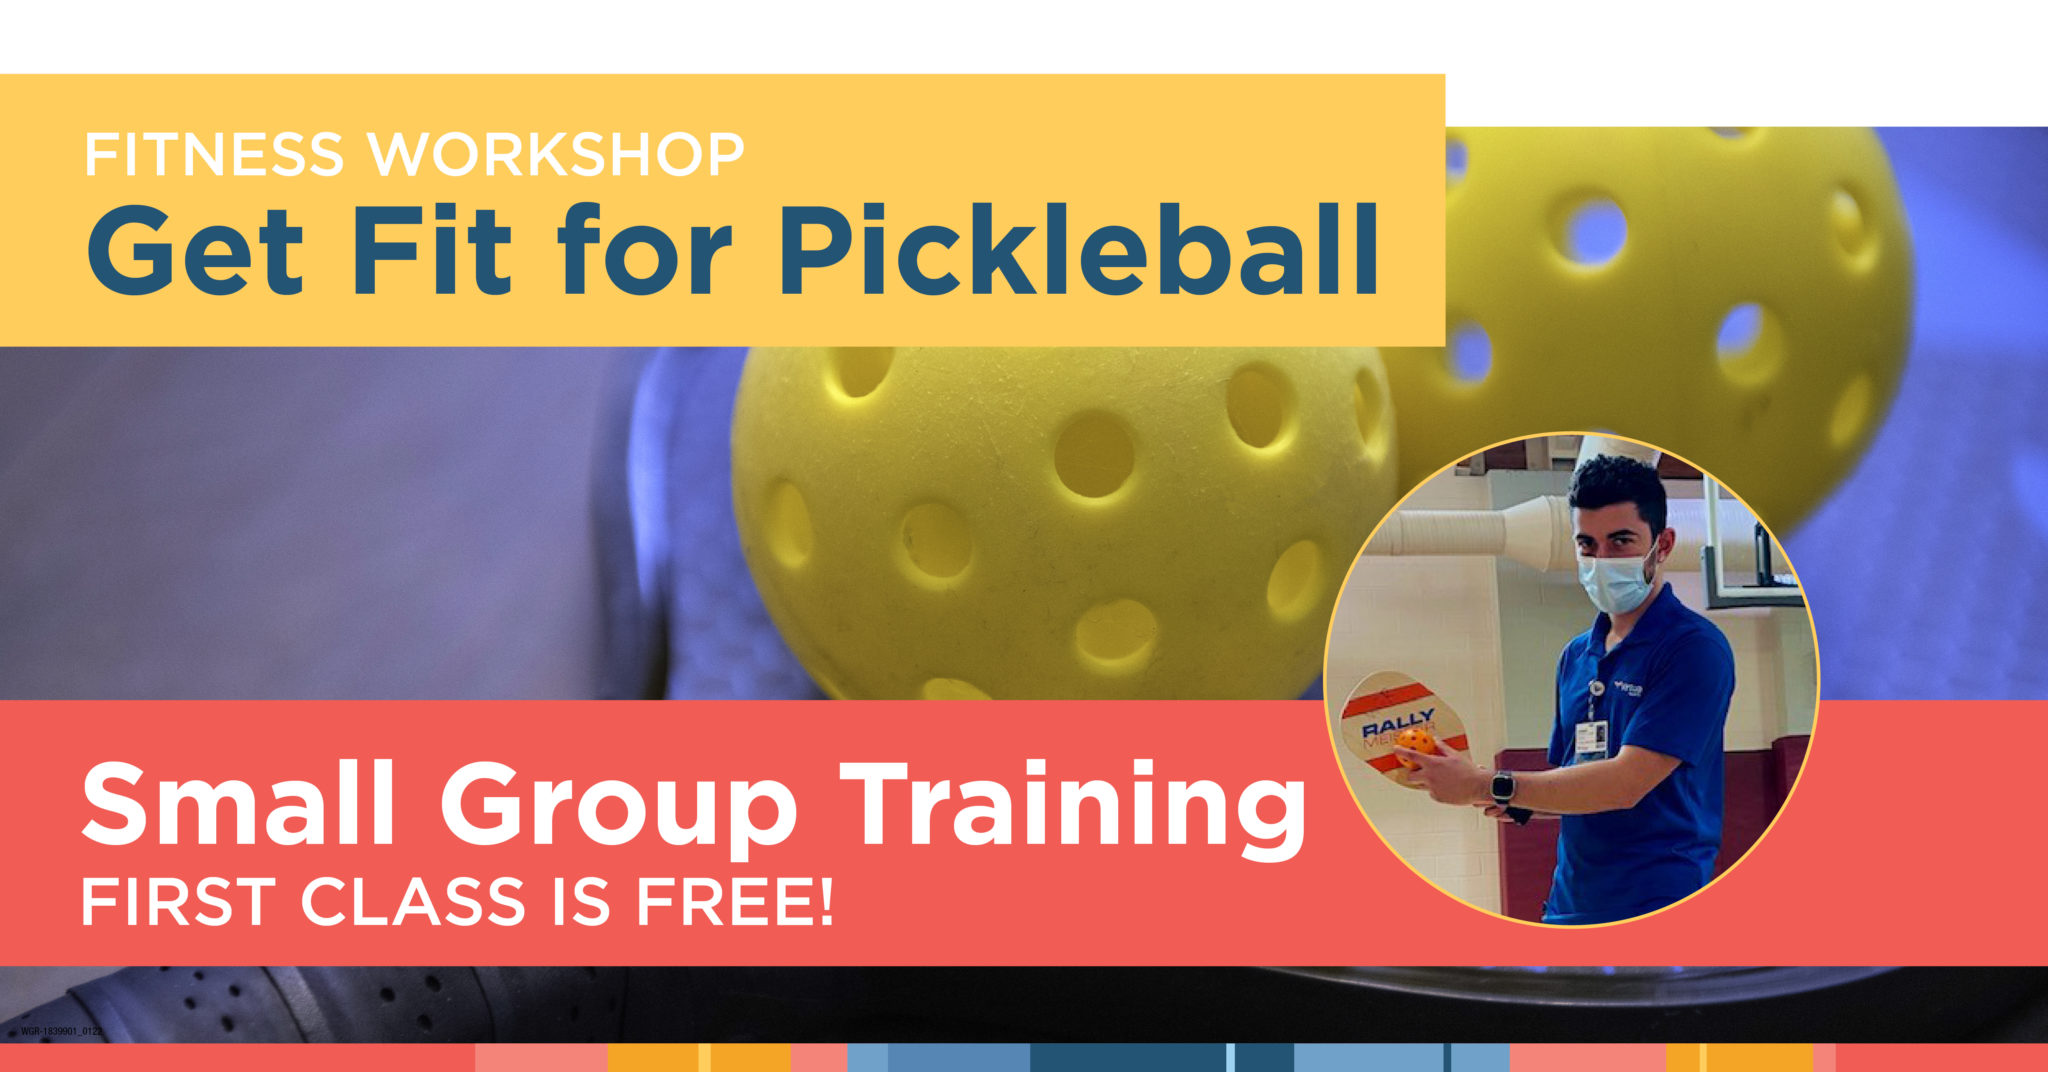 Get Fit for Pickleball